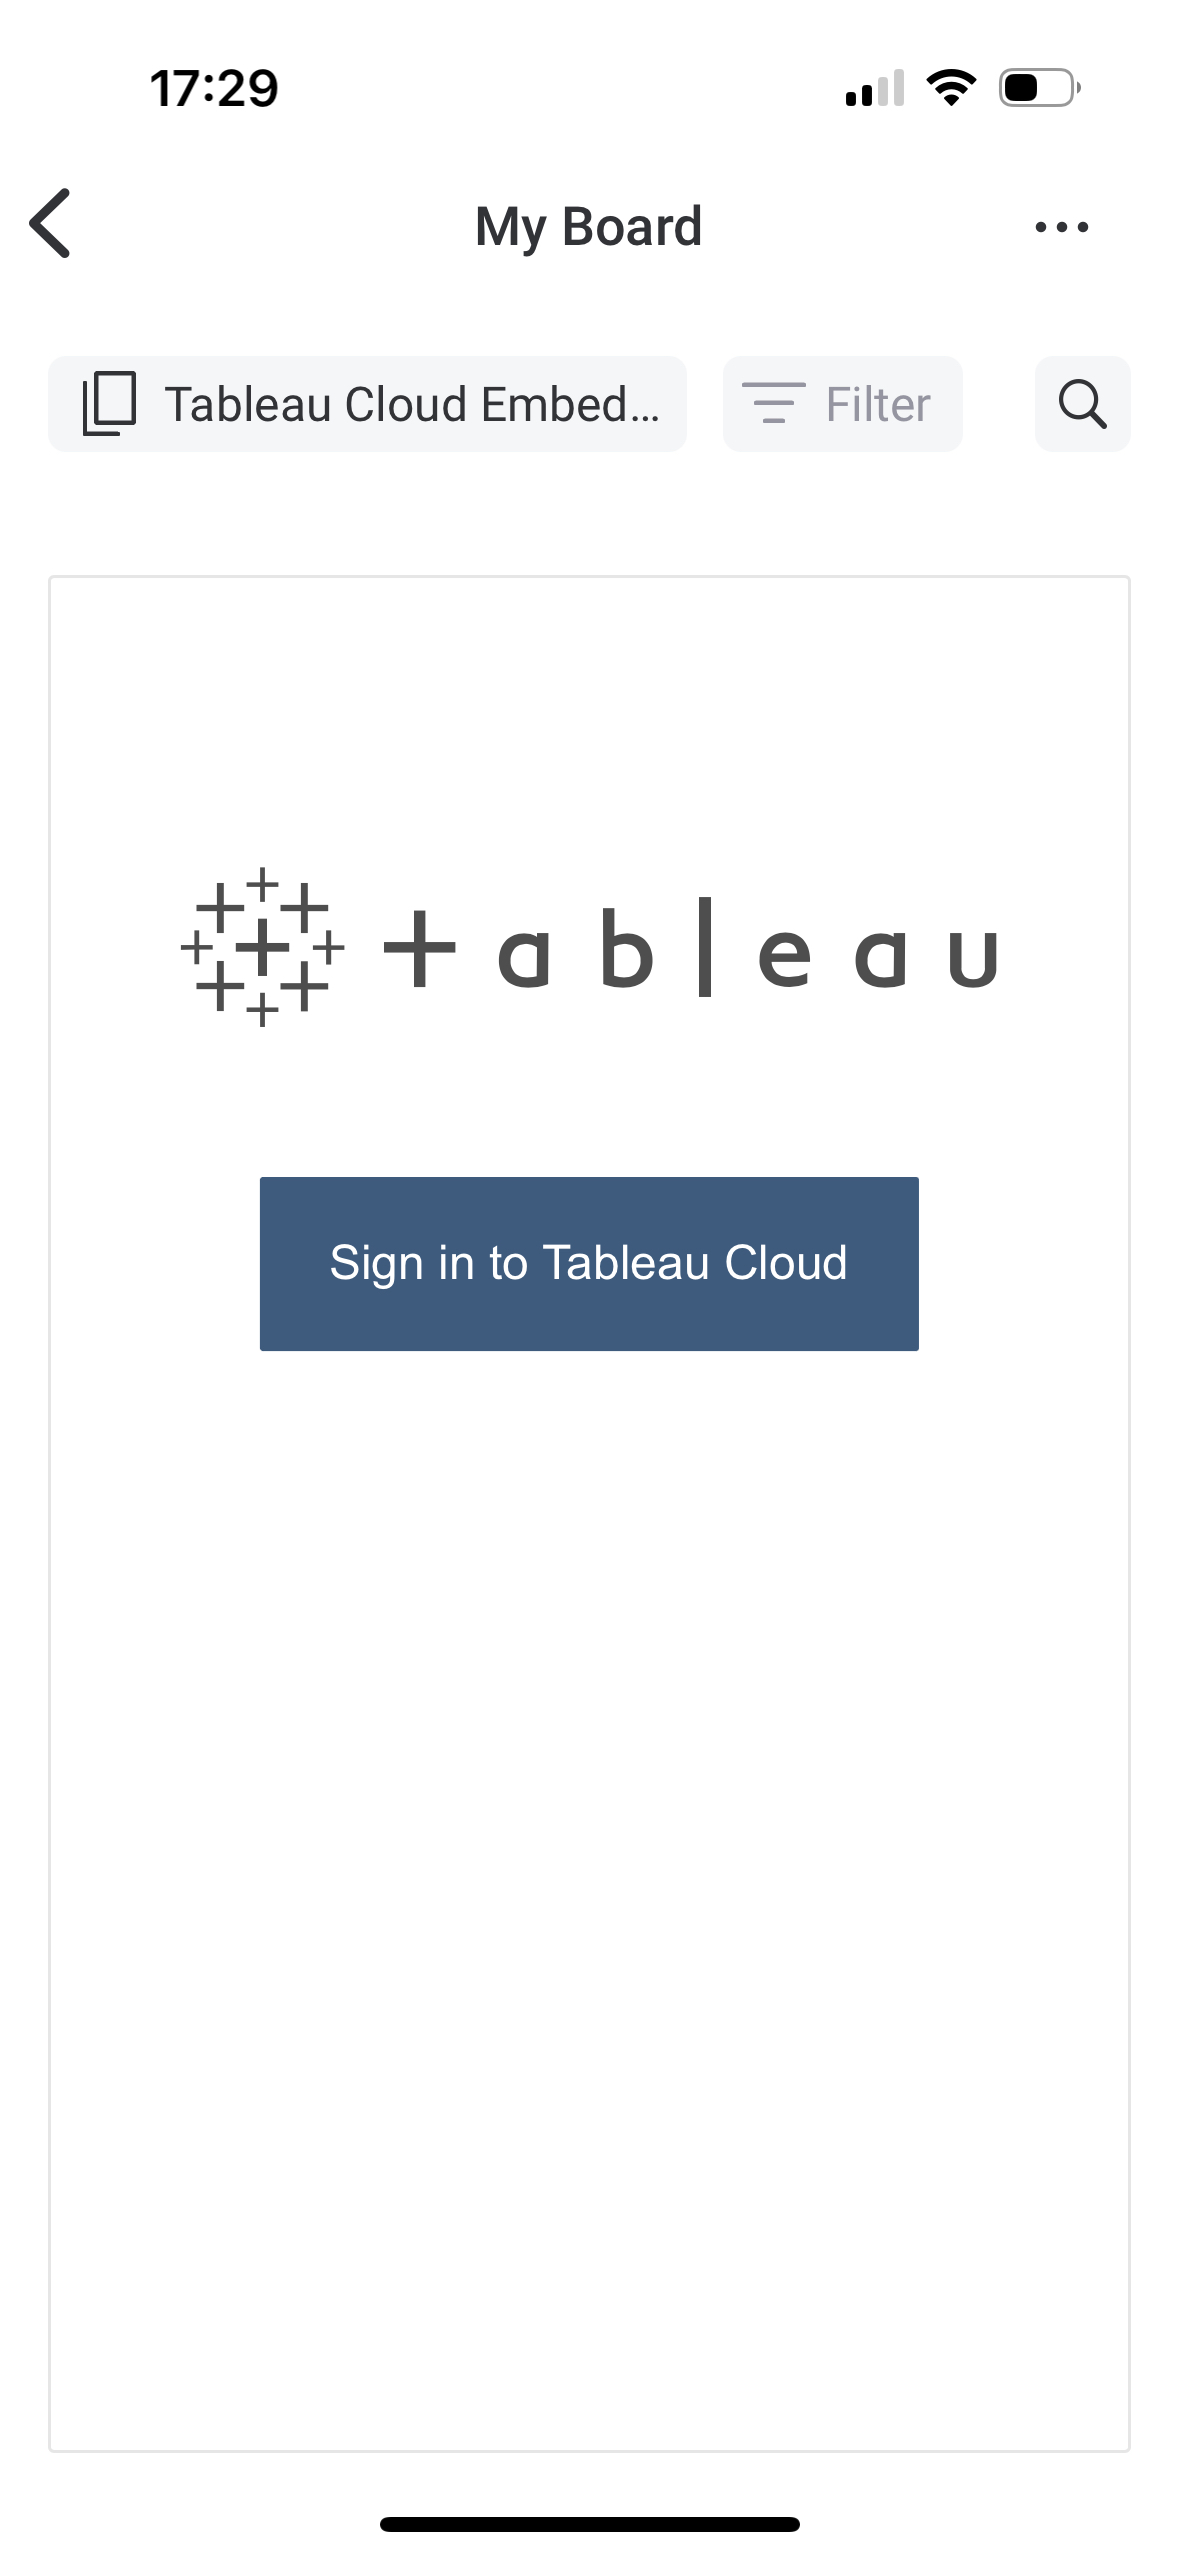 Sign in to Tableau Cloud - in monday.com mobile app